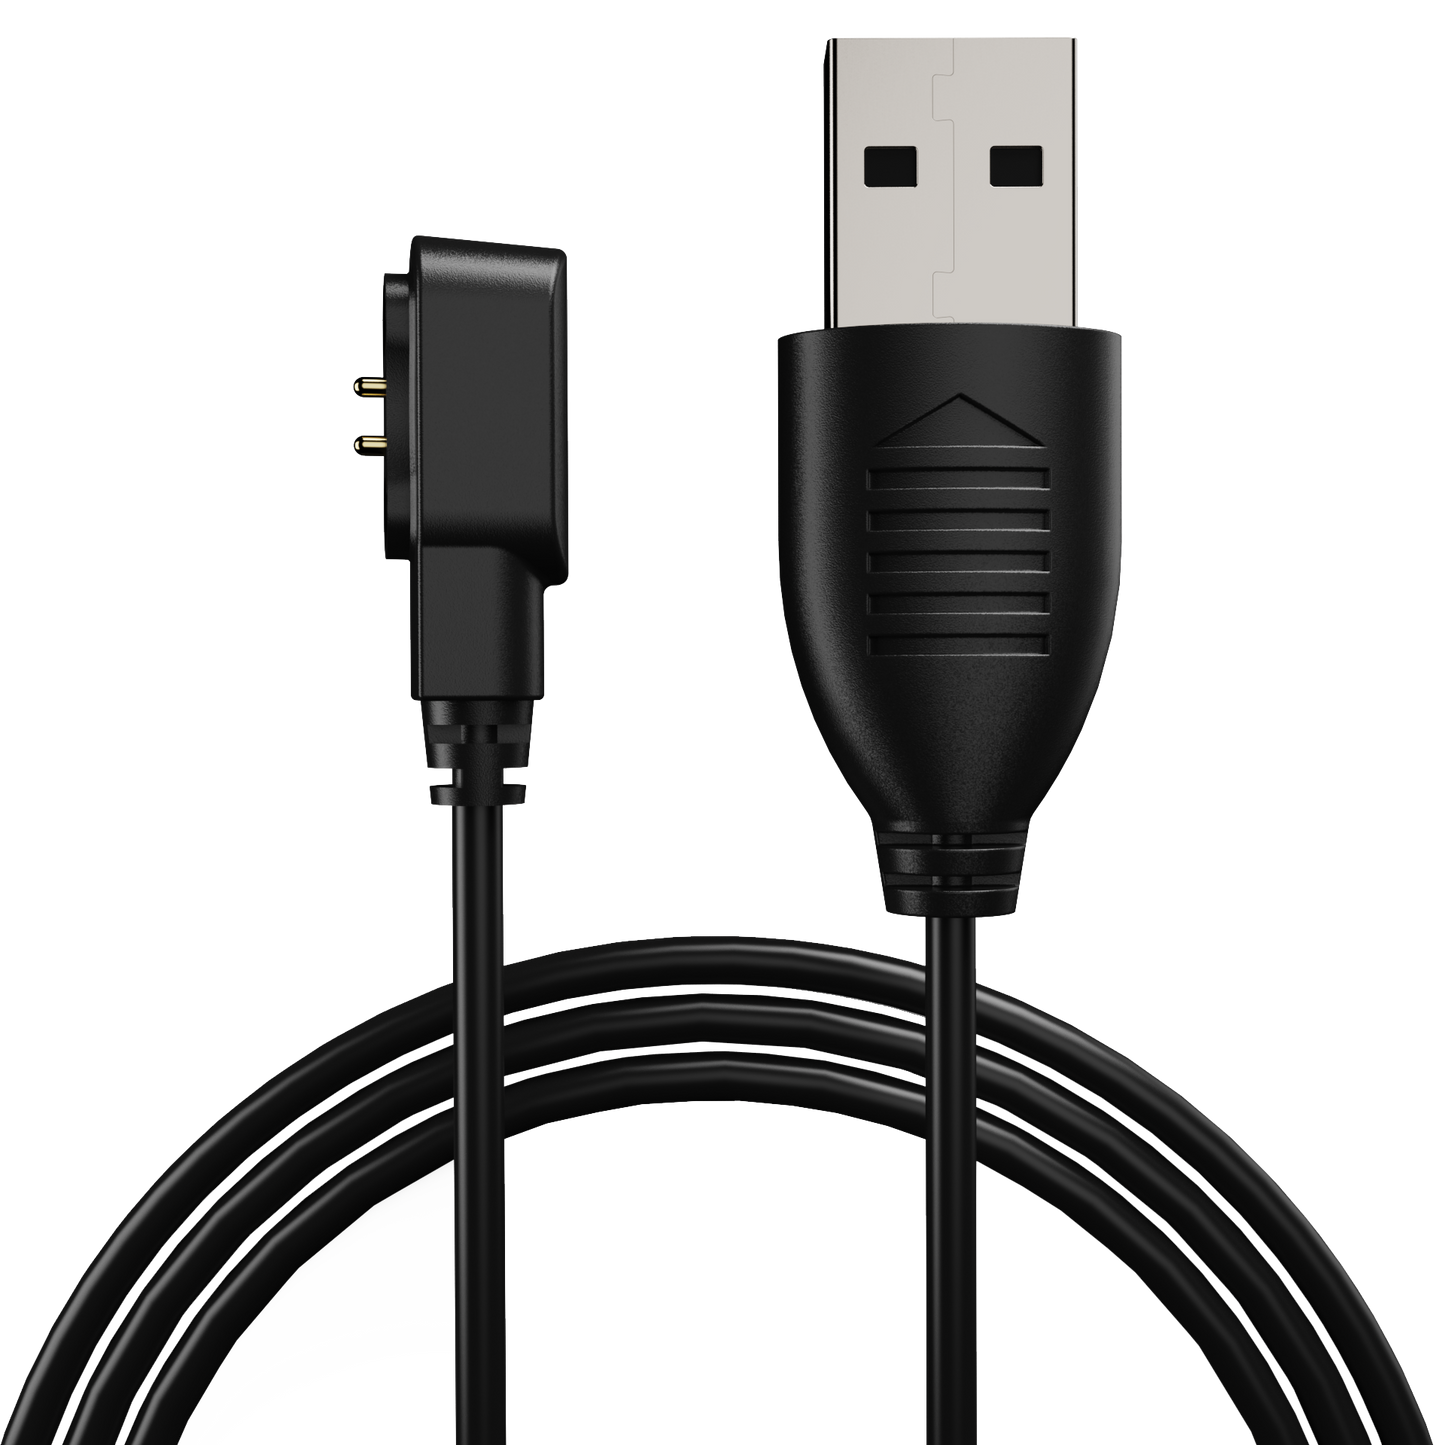 Smartwatch Charging Cable - W1